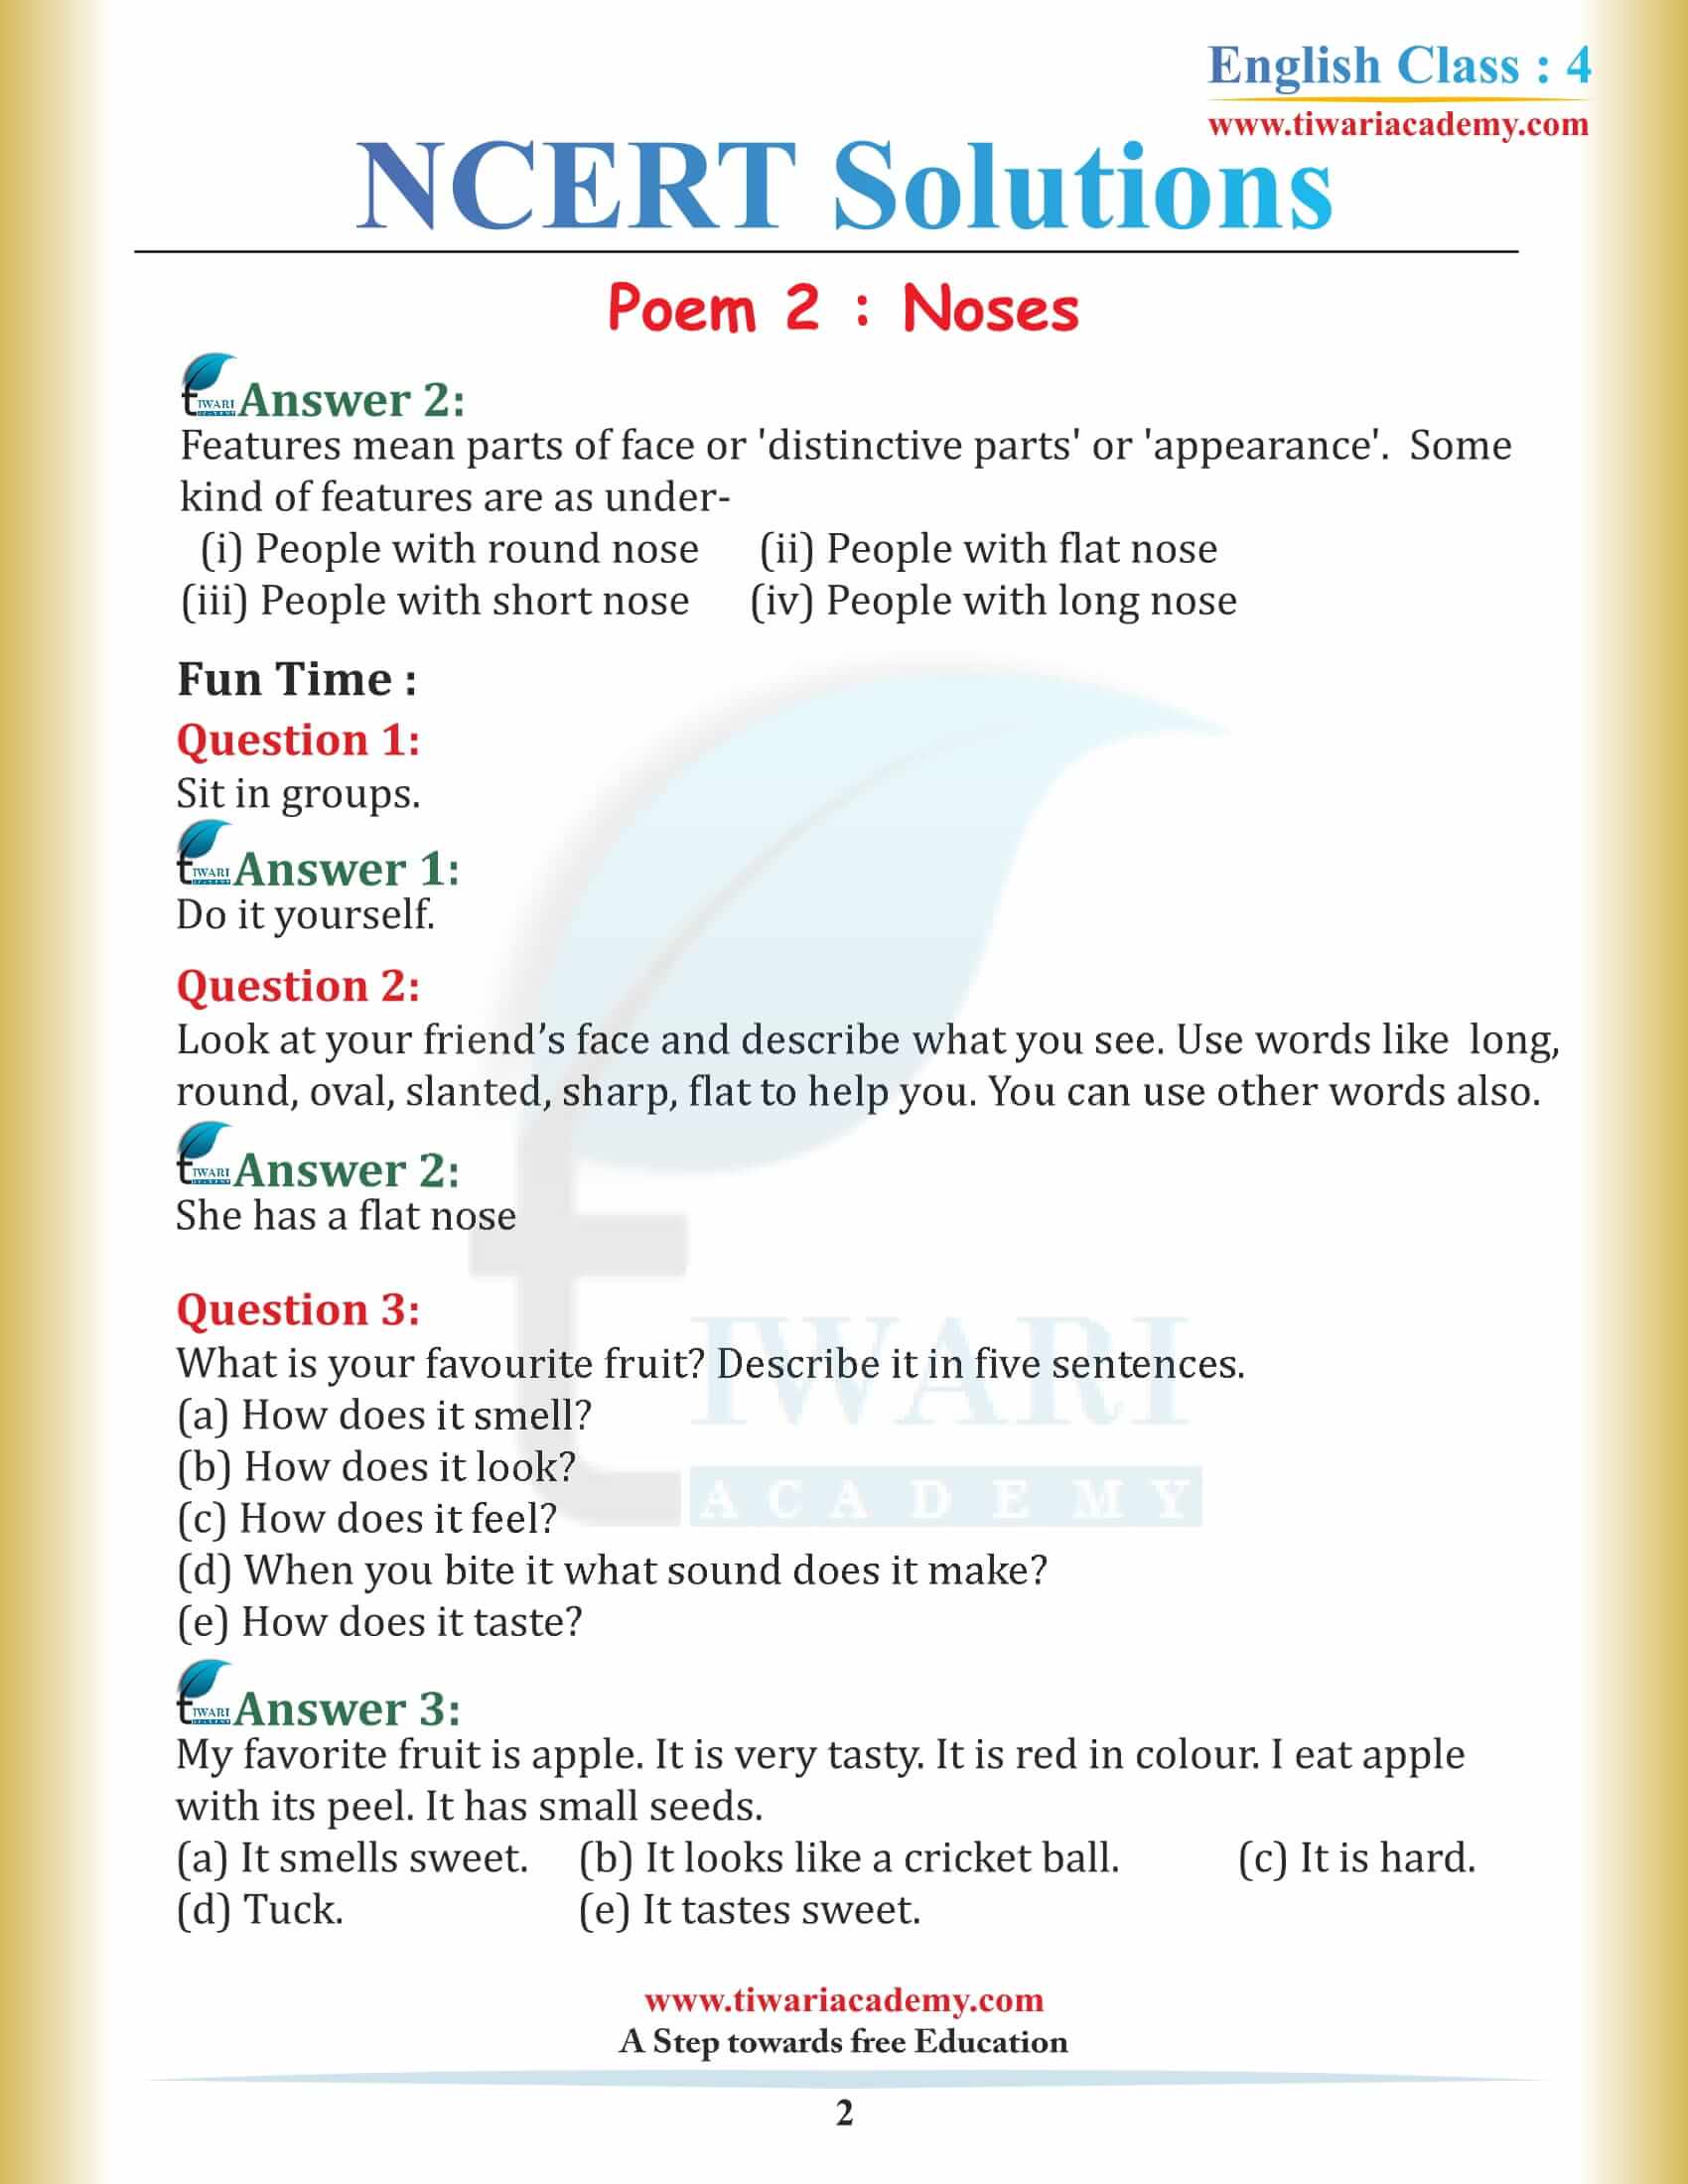 NCERT Solutions for Class 4 English Unit 2